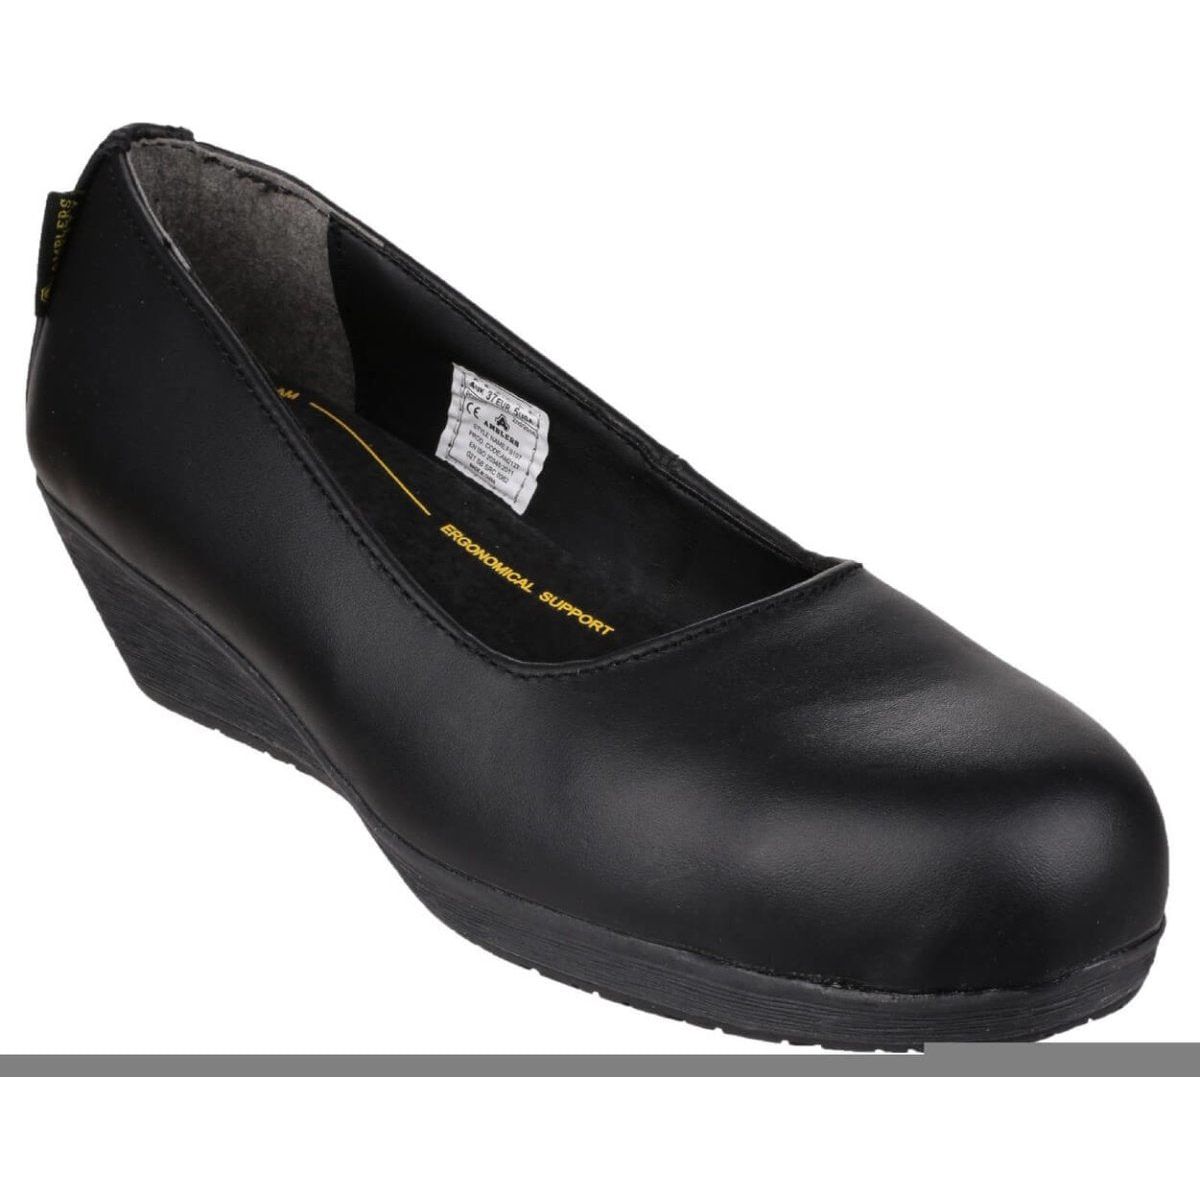 Amblers Fs107 Heeled Court Safety Shoes Womens - workweargurus.com